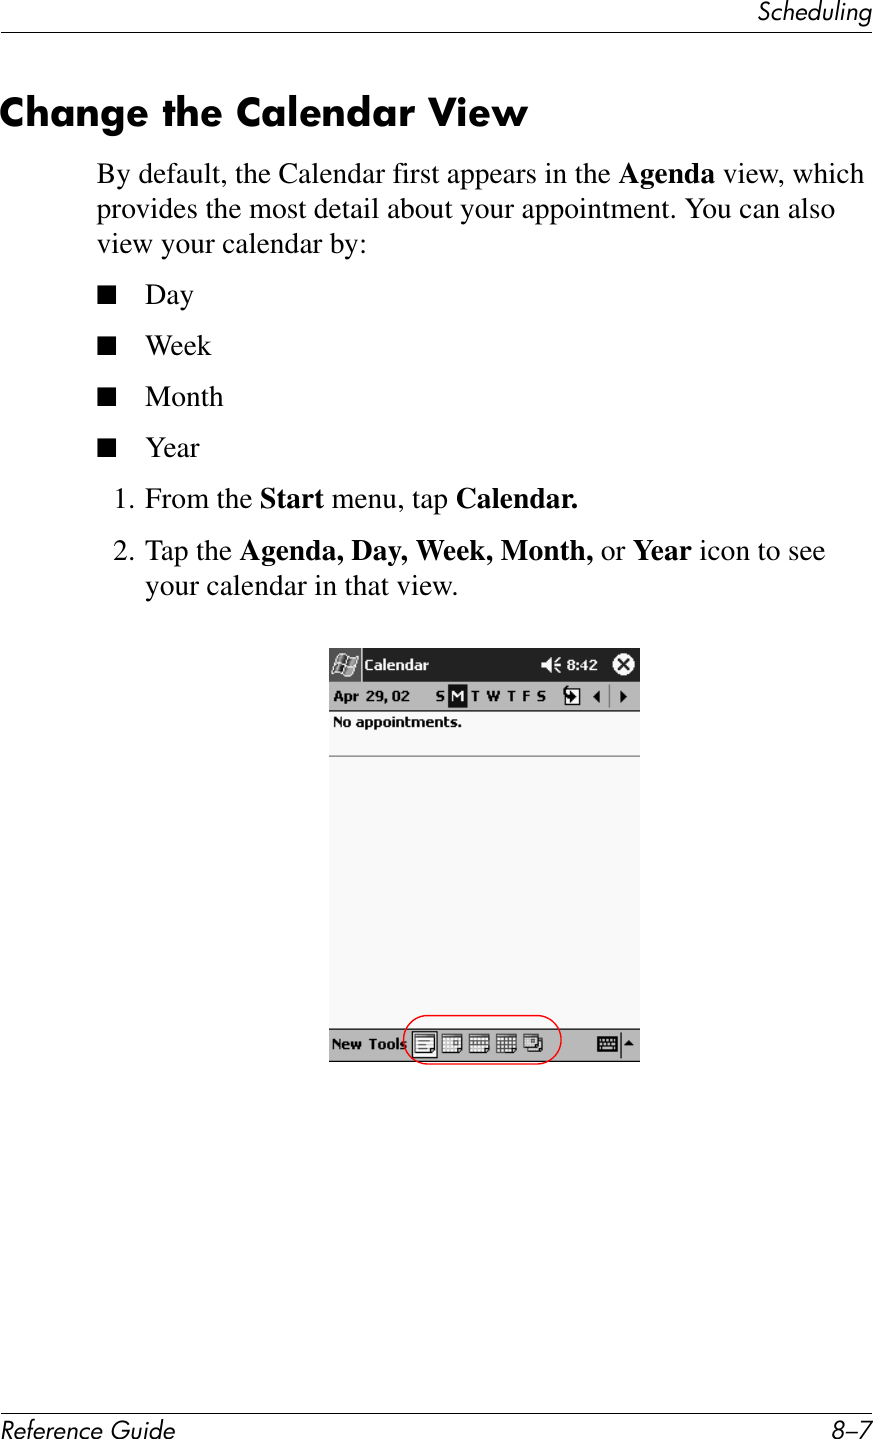 3&amp;Q&quot;+)K*%2!&quot;#&quot;$&quot;%&amp;&quot;&apos;()*+&quot; G/F2?;$&apos;&quot;&amp;7?&quot;&amp;2;@&quot;$*;!&amp;Z)&quot;LBy default, the Calendar first appears in the Agenda view, which provides the most detail about your appointment. You can also view your calendar by:■Day■Week■Month■Year1. From the Start menu, tap Calendar.2. Tap the Agenda, Day, Week, Month, or Year icon to see your calendar in that view.